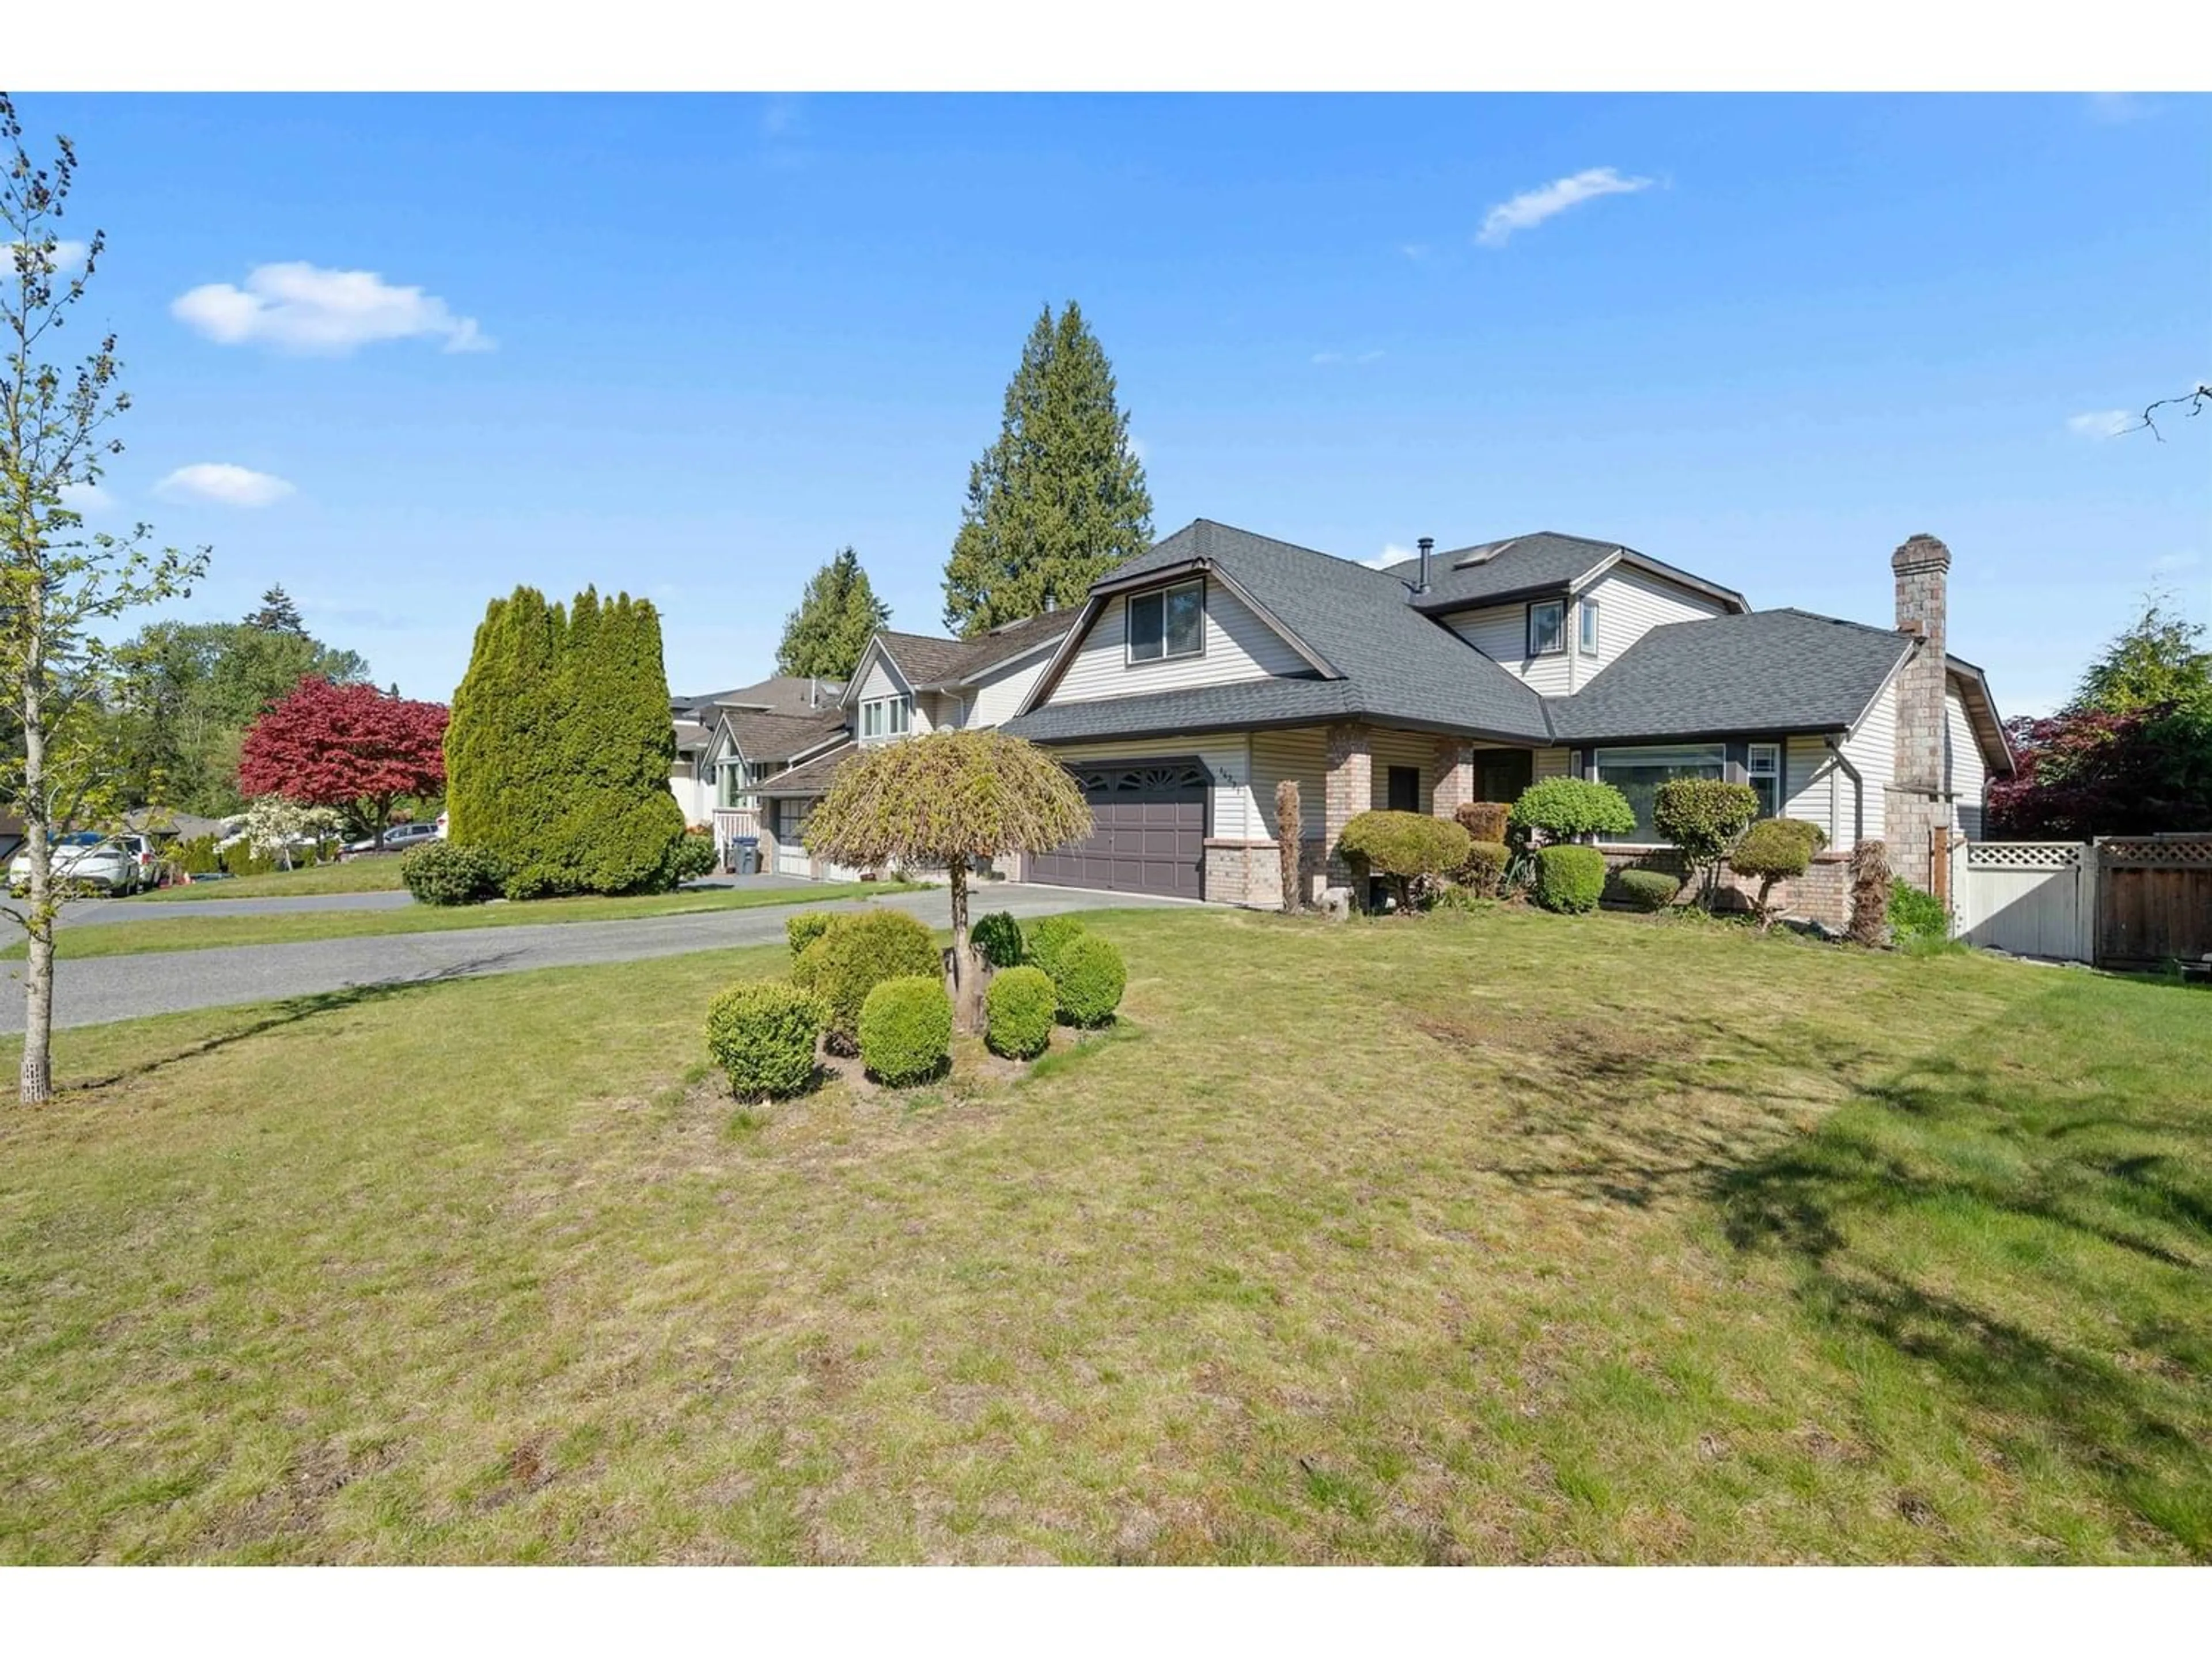 Frontside or backside of a home for 14331 77A AVENUE, Surrey British Columbia V3W0L2